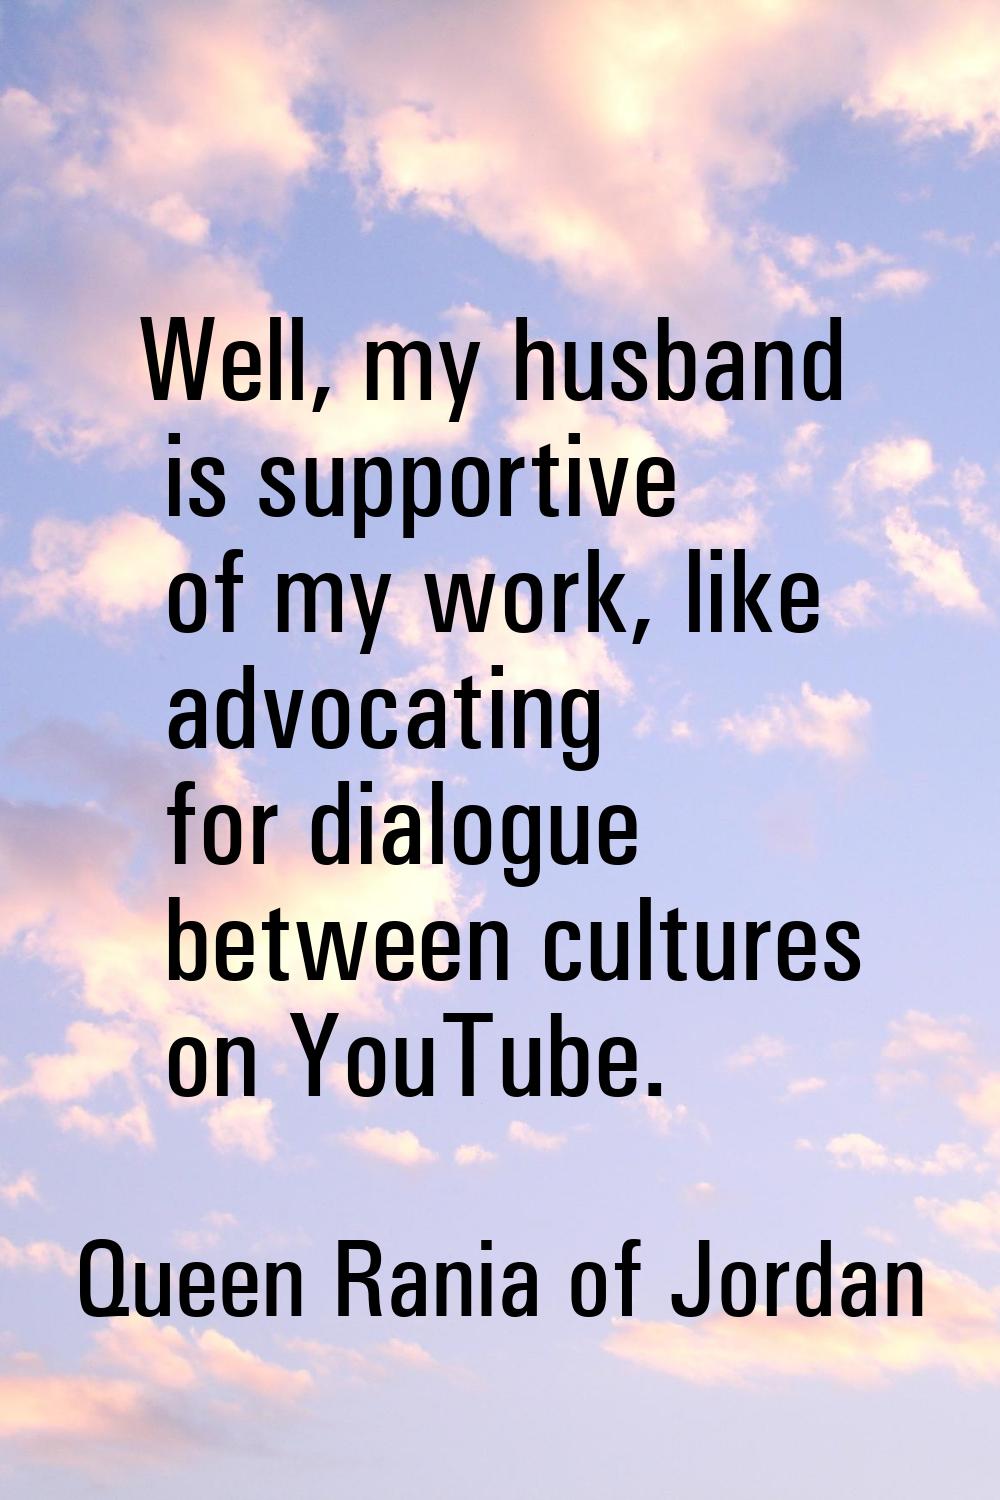 Well, my husband is supportive of my work, like advocating for dialogue between cultures on YouTube